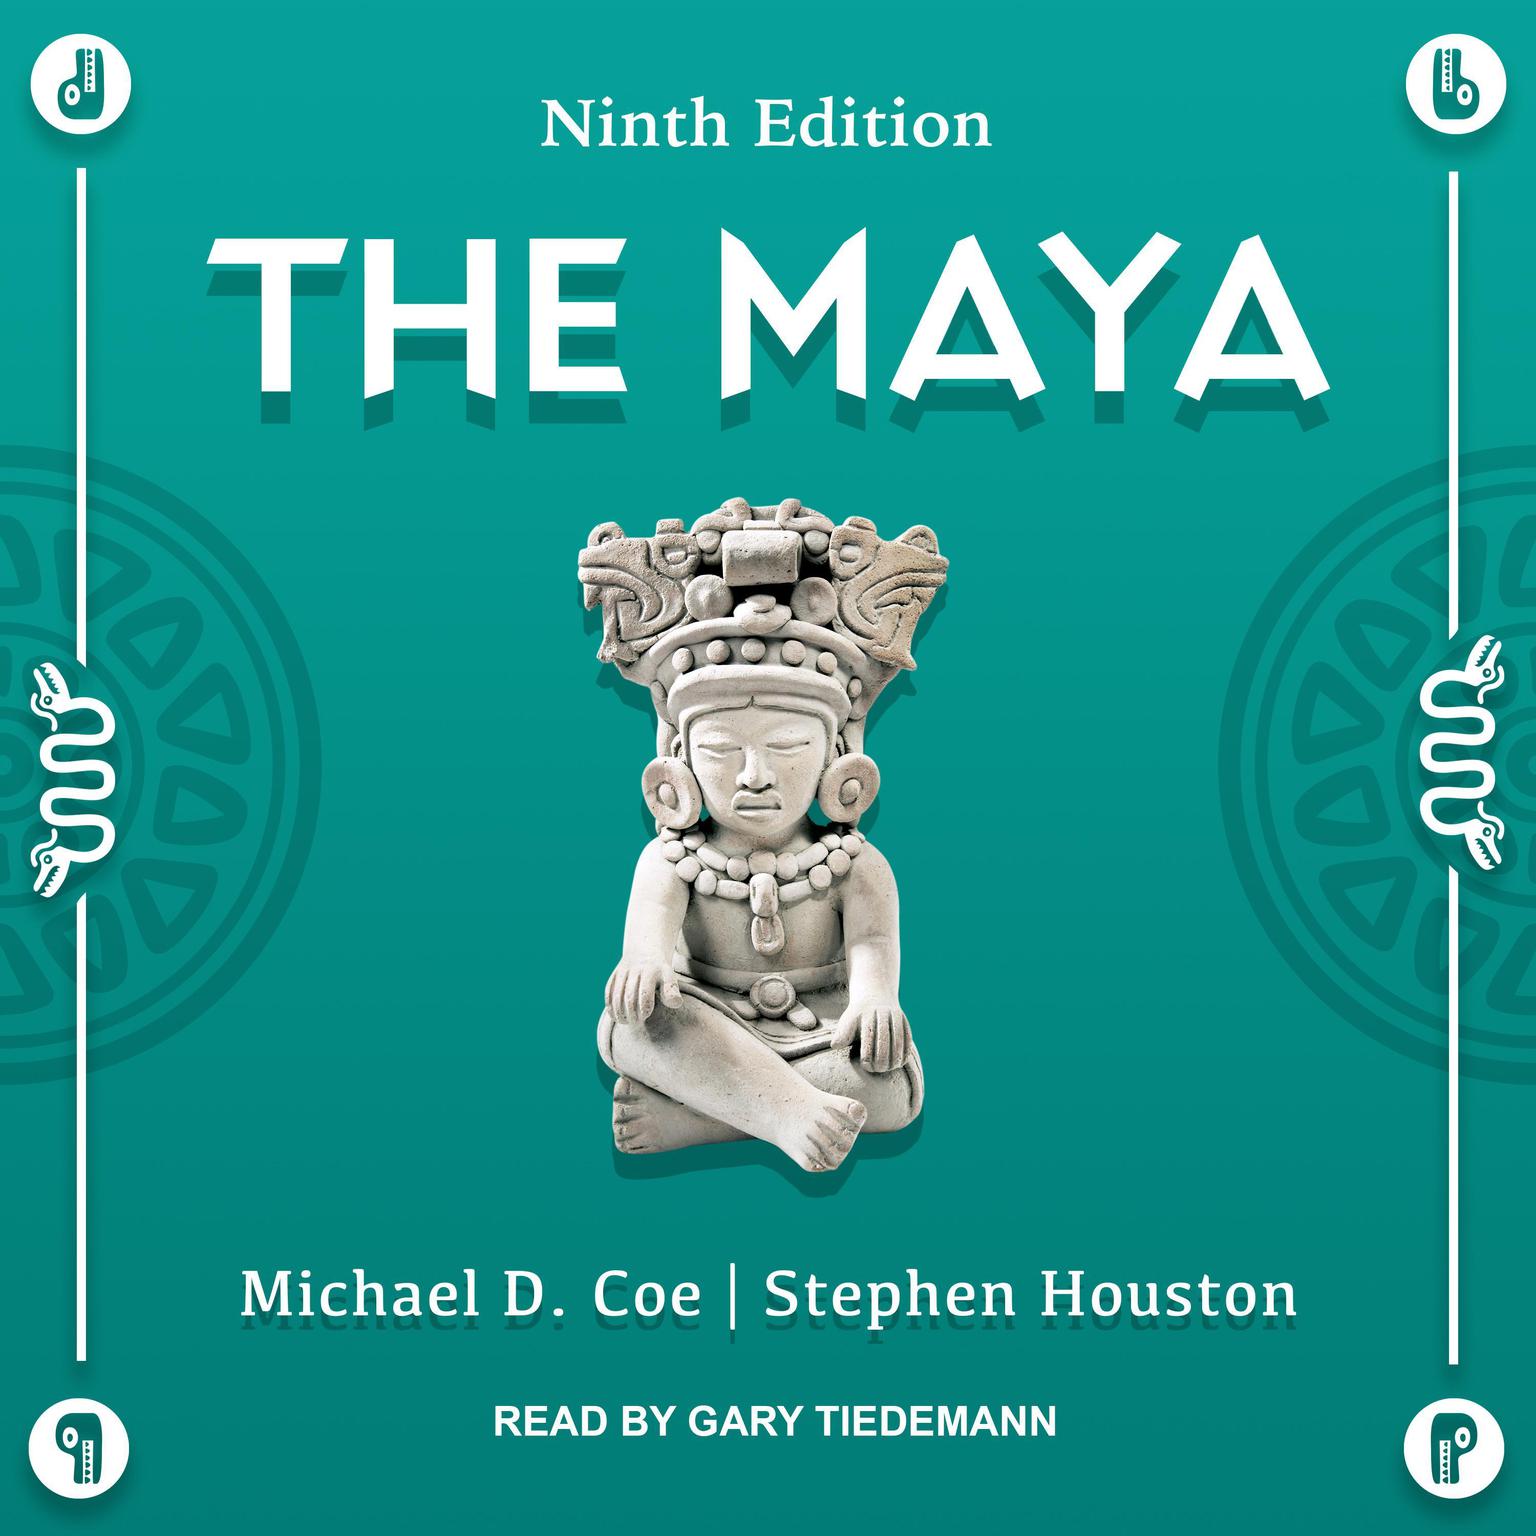 The Maya: Ninth Edition Audiobook, by Michael D. Coe